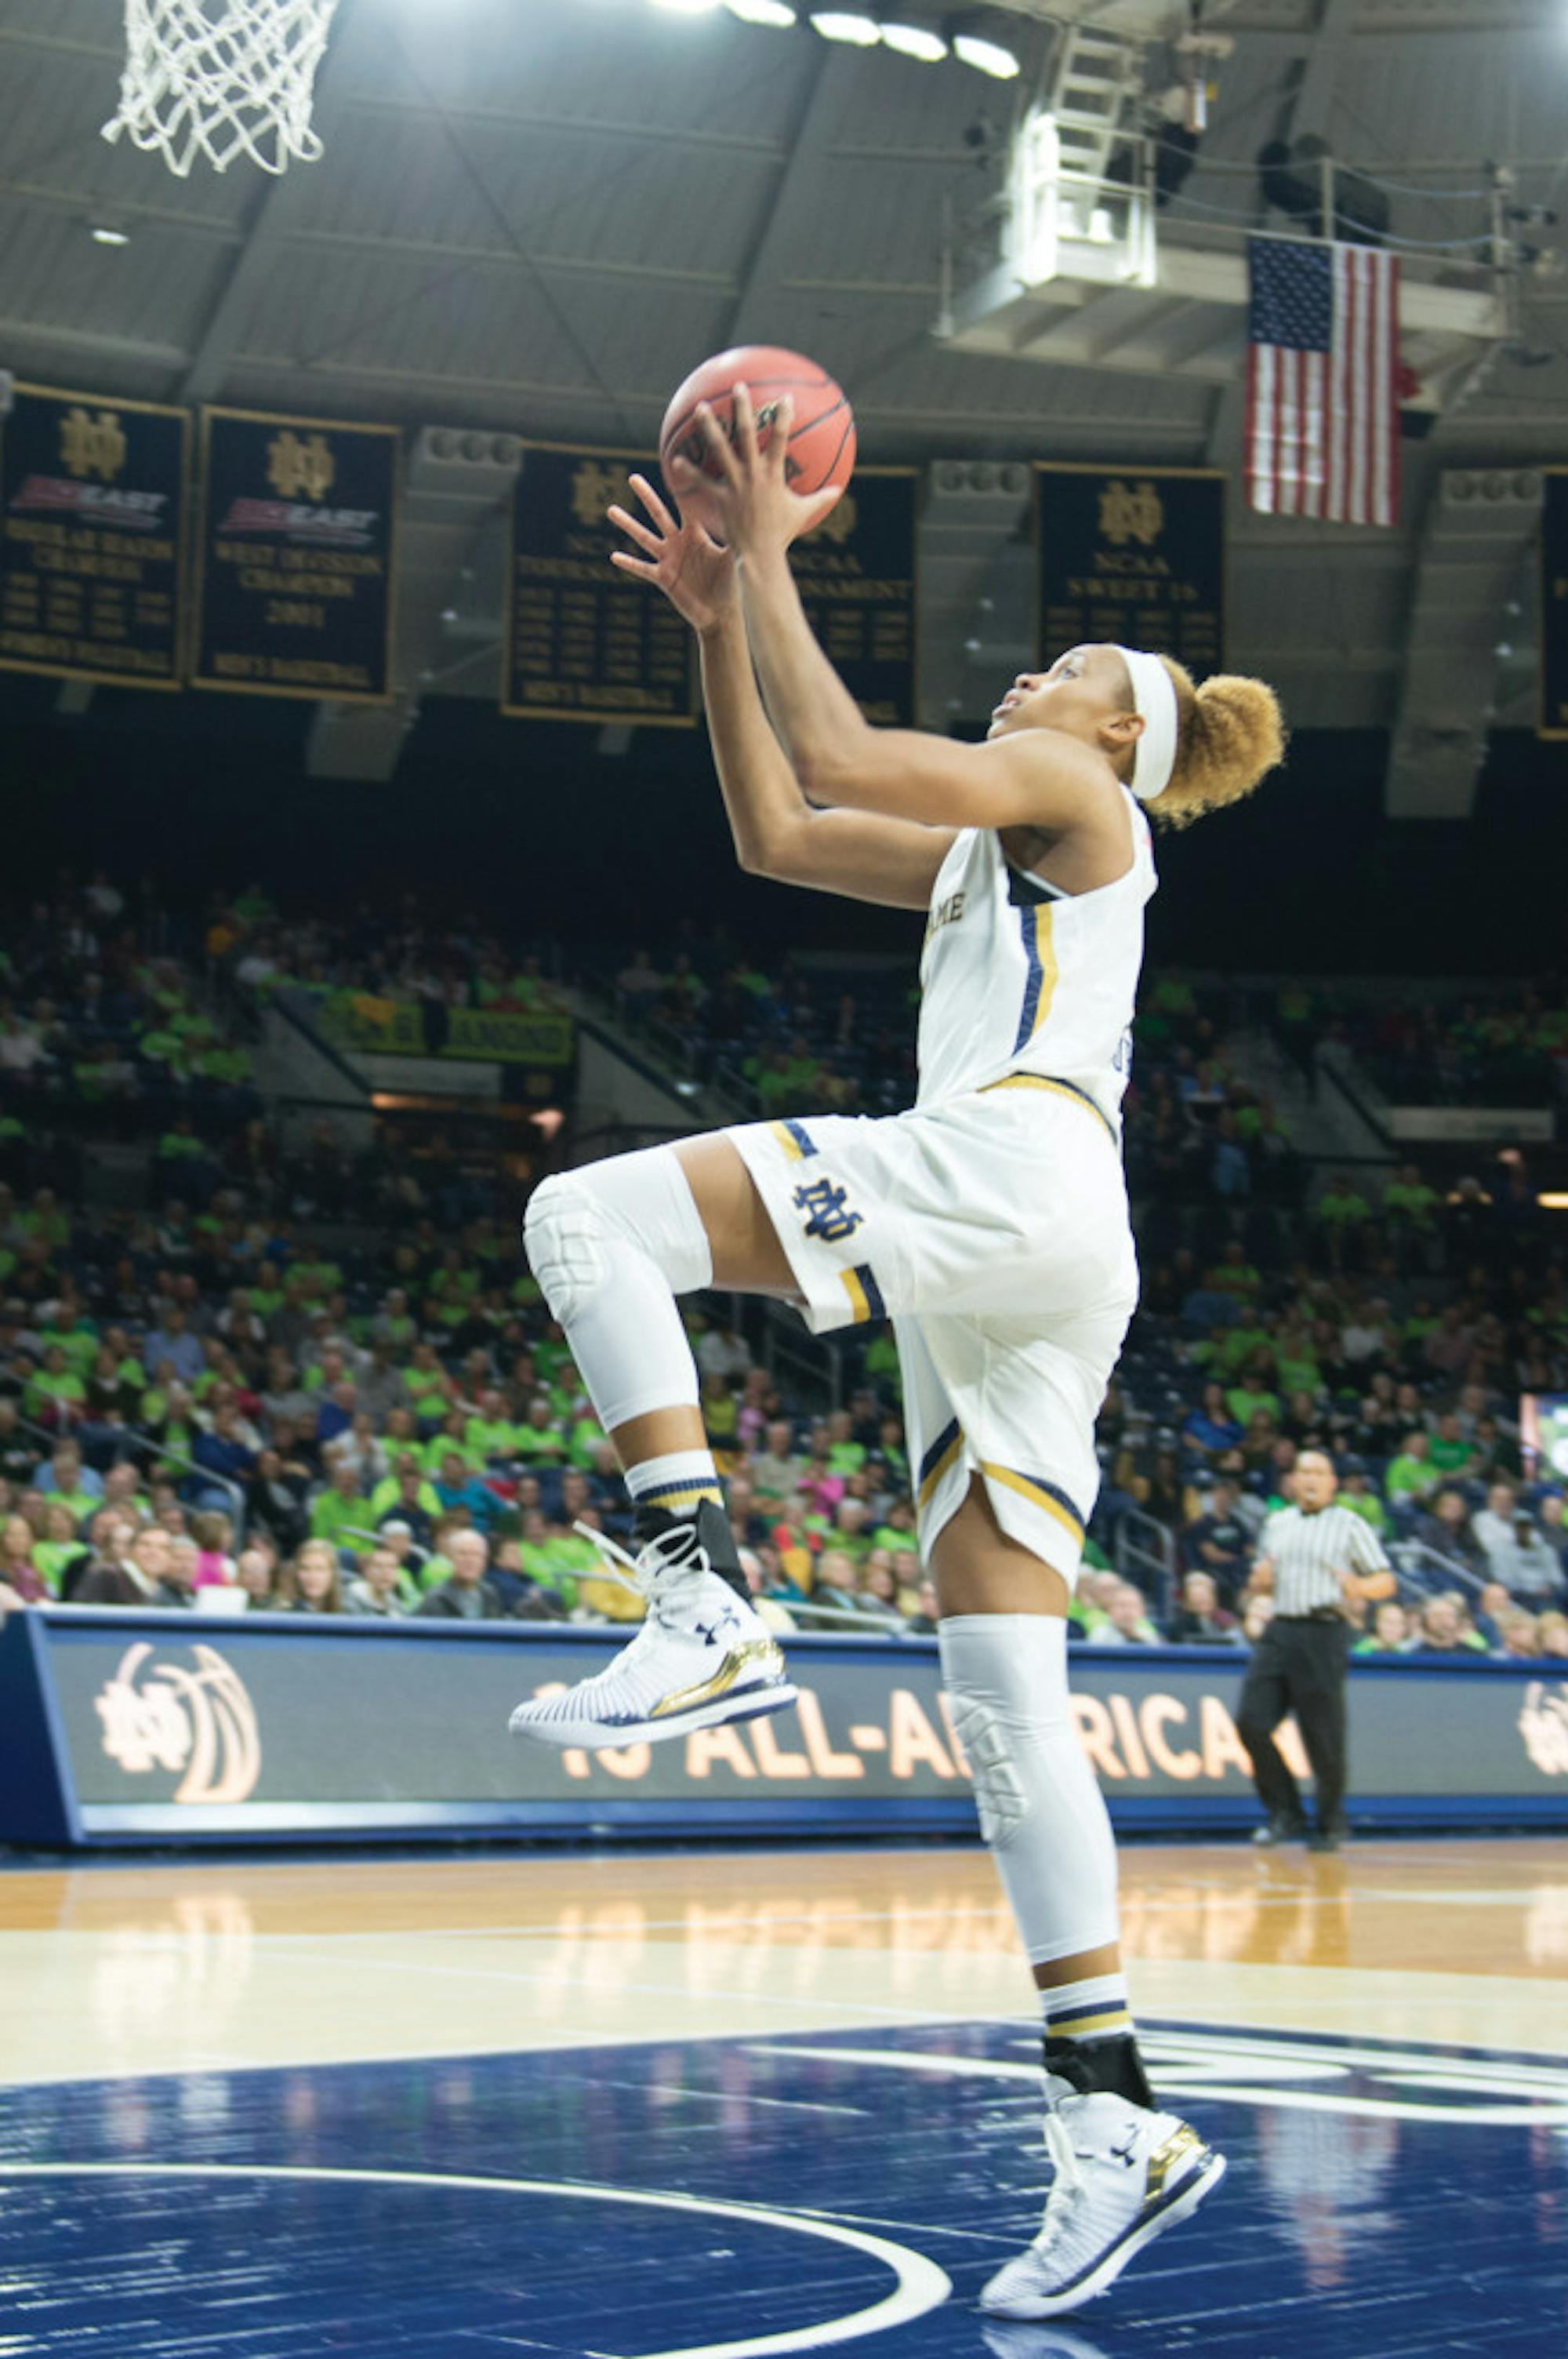 Irish freshman forward Brianna Turner during Notre Dame’s 104-29 win over Holy Cross on Nov. 23 at Purcell Pavilion.